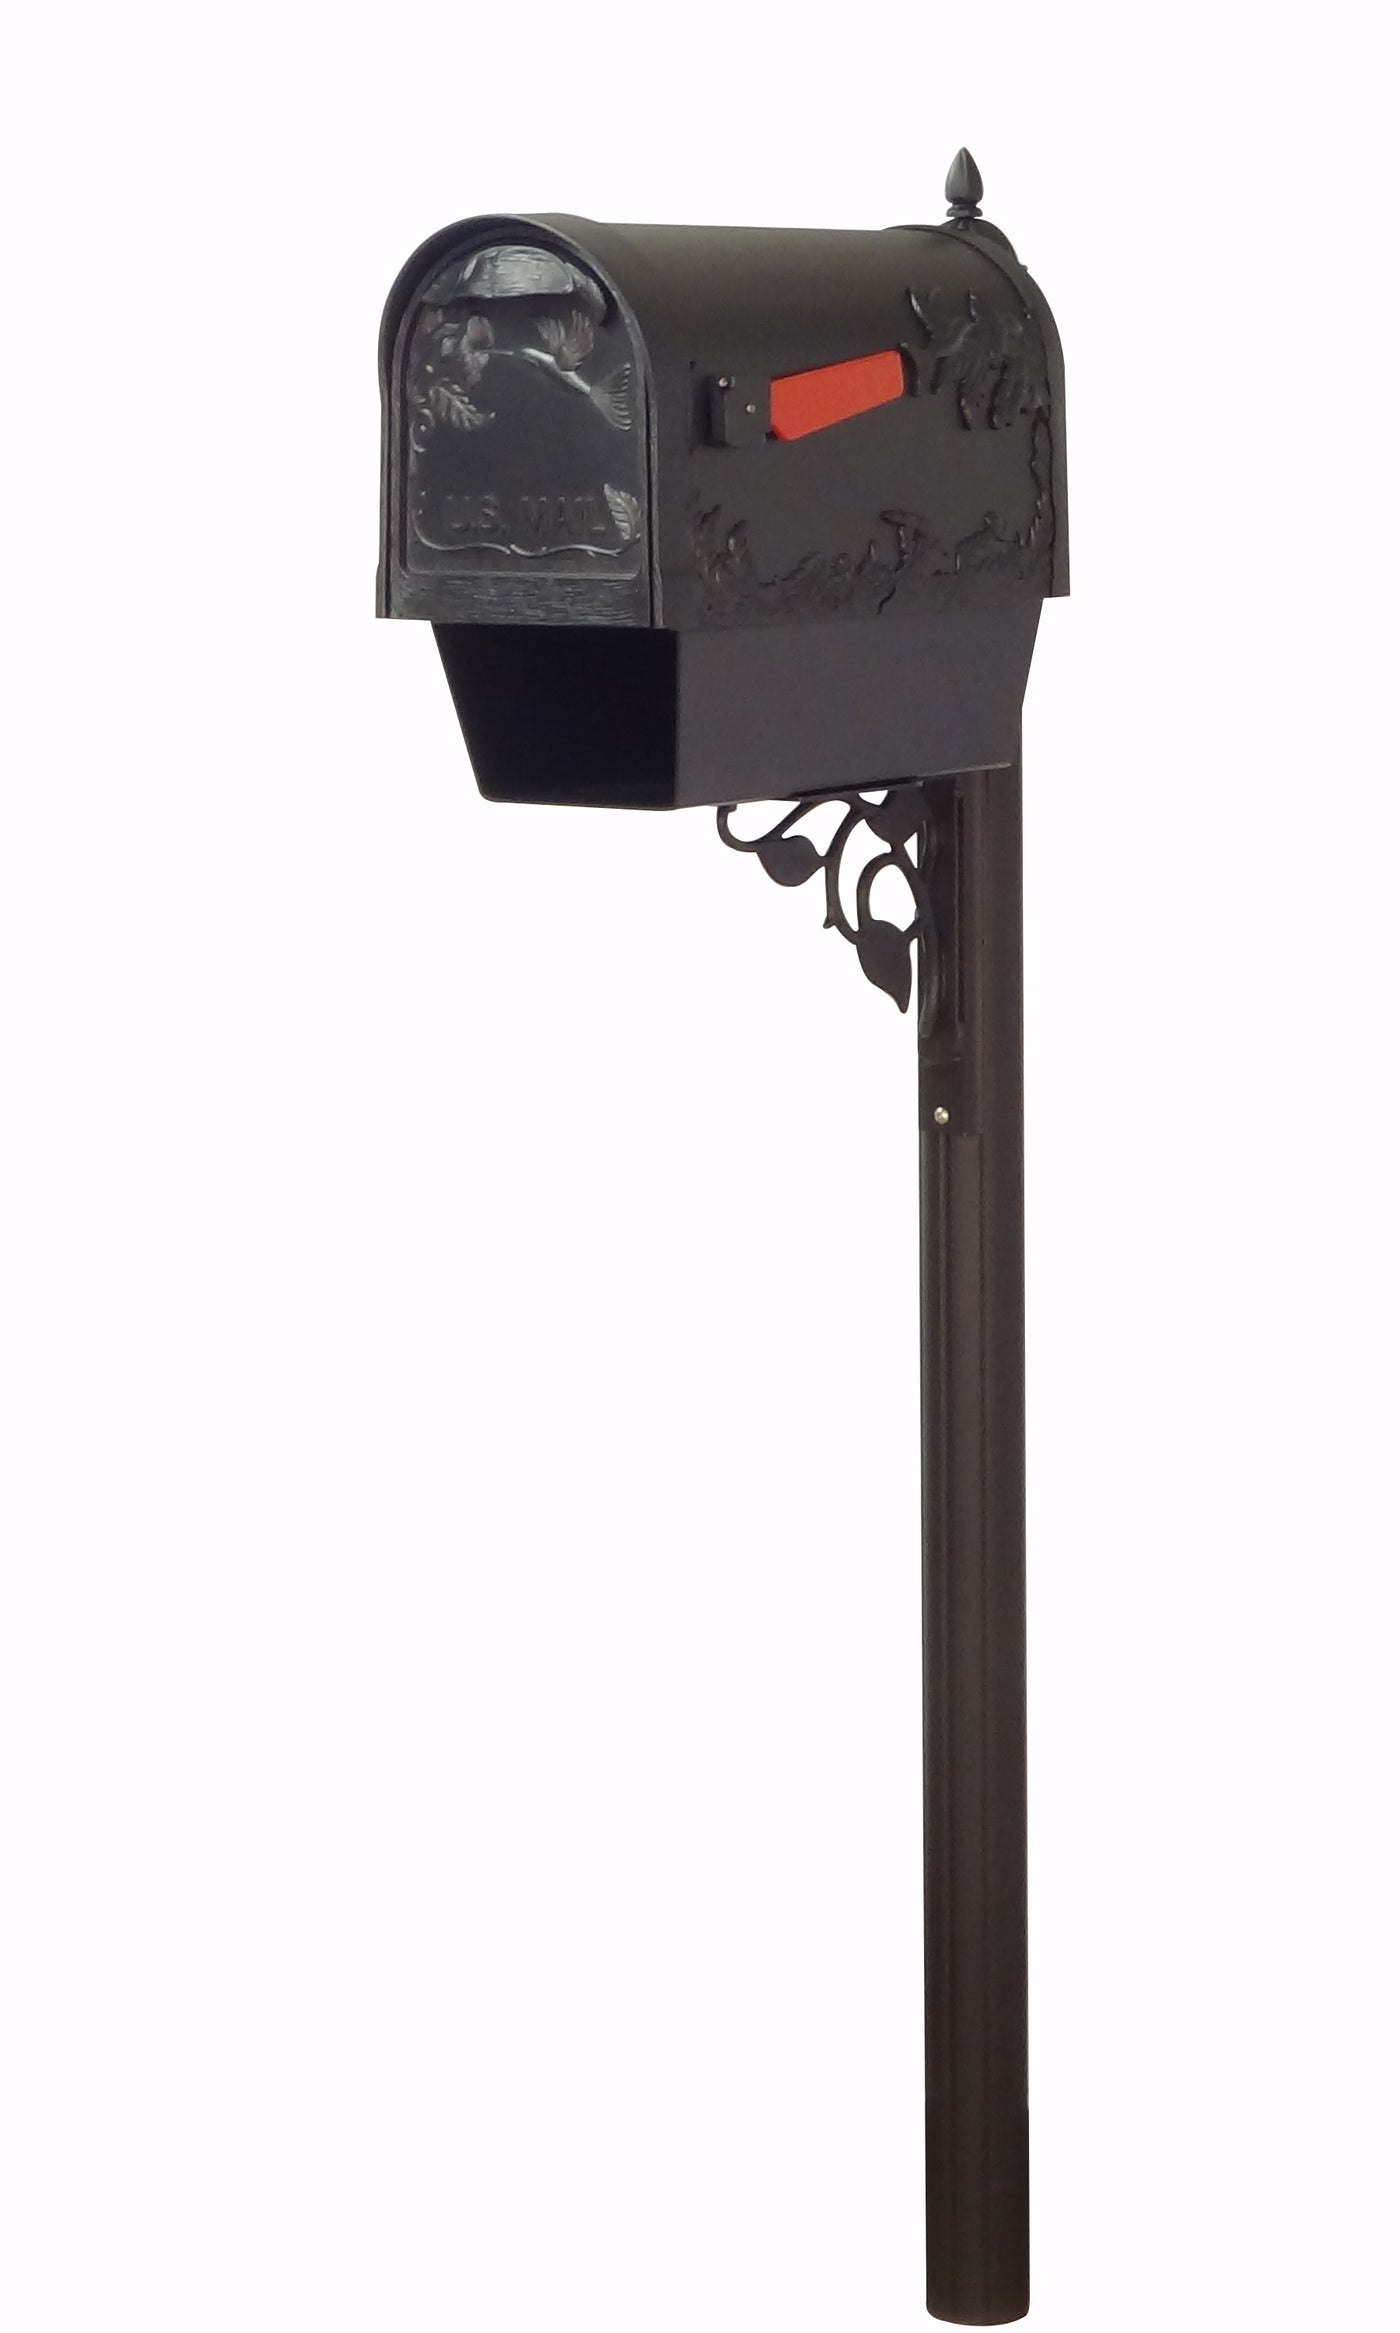 Hummingbird Curbside Mailbox with Newspaper Tube and Albion Mailbox Post